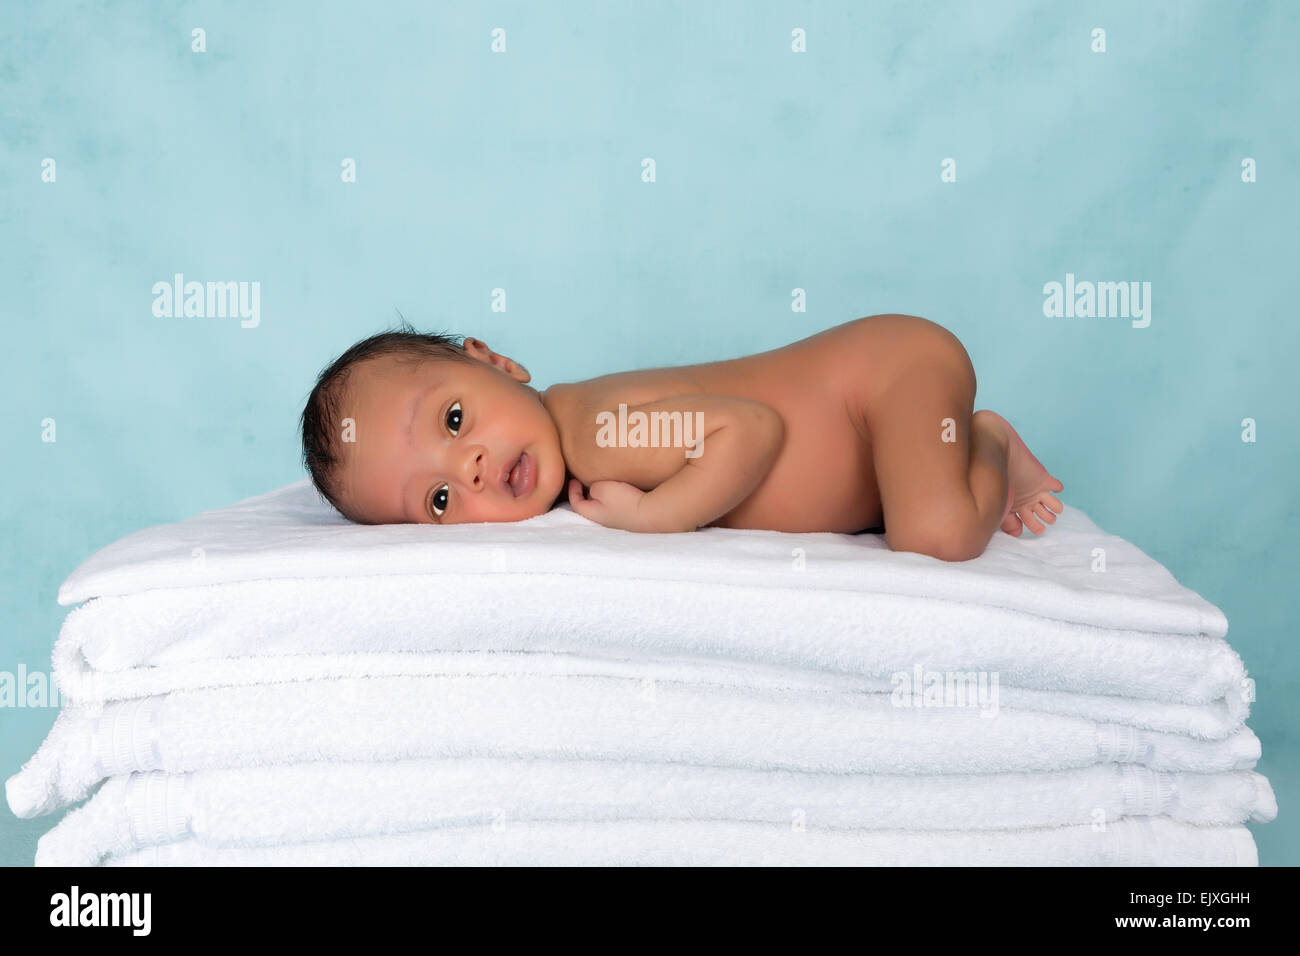 Adorable little biracial baby of 11 days old on a stack of towels Stock Photo